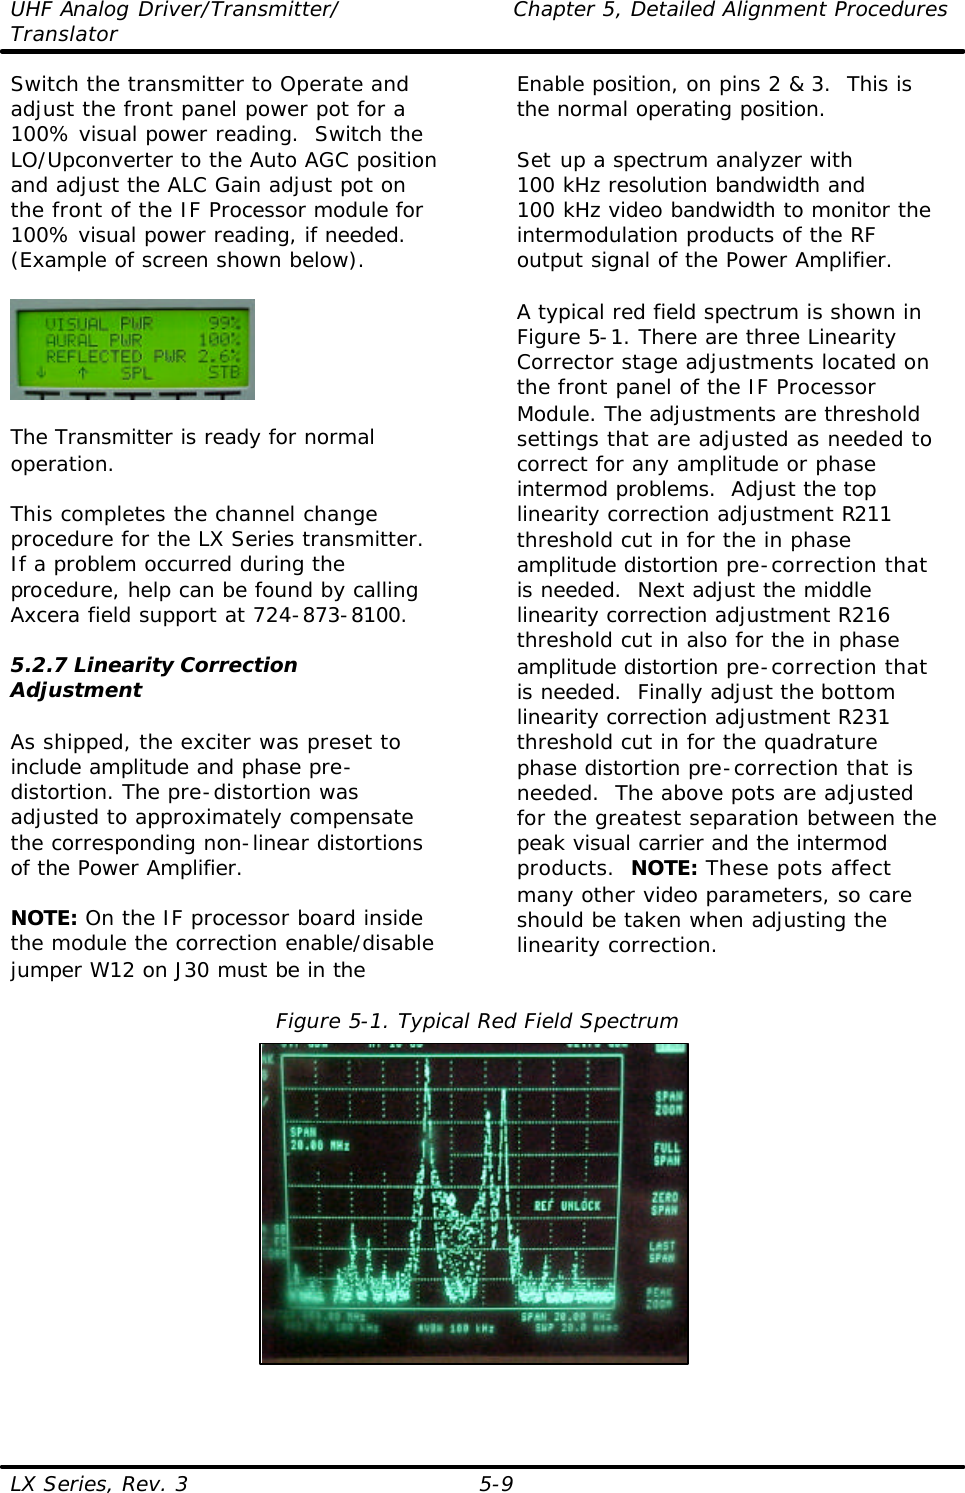 UHF Analog Driver/Transmitter/ Chapter 5, Detailed Alignment Procedures Translator  LX Series, Rev. 3 5-9 Switch the transmitter to Operate and adjust the front panel power pot for a 100% visual power reading.  Switch the LO/Upconverter to the Auto AGC position and adjust the ALC Gain adjust pot on the front of the IF Processor module for 100% visual power reading, if needed. (Example of screen shown below).    The Transmitter is ready for normal operation.  This completes the channel change procedure for the LX Series transmitter.  If a problem occurred during the procedure, help can be found by calling Axcera field support at 724-873-8100.  5.2.7 Linearity Correction Adjustment  As shipped, the exciter was preset to include amplitude and phase pre-distortion. The pre-distortion was adjusted to approximately compensate the corresponding non-linear distortions of the Power Amplifier.  NOTE: On the IF processor board inside the module the correction enable/disable jumper W12 on J30 must be in the Enable position, on pins 2 &amp; 3.  This is the normal operating position.  Set up a spectrum analyzer with  100 kHz resolution bandwidth and 100 kHz video bandwidth to monitor the intermodulation products of the RF output signal of the Power Amplifier.   A typical red field spectrum is shown in Figure 5-1. There are three Linearity Corrector stage adjustments located on the front panel of the IF Processor Module. The adjustments are threshold settings that are adjusted as needed to correct for any amplitude or phase intermod problems.  Adjust the top linearity correction adjustment R211 threshold cut in for the in phase amplitude distortion pre-correction that is needed.  Next adjust the middle linearity correction adjustment R216 threshold cut in also for the in phase amplitude distortion pre-correction that is needed.  Finally adjust the bottom linearity correction adjustment R231 threshold cut in for the quadrature phase distortion pre-correction that is needed.  The above pots are adjusted for the greatest separation between the peak visual carrier and the intermod products.  NOTE: These pots affect many other video parameters, so care should be taken when adjusting the linearity correction.   Figure 5-1. Typical Red Field Spectrum  